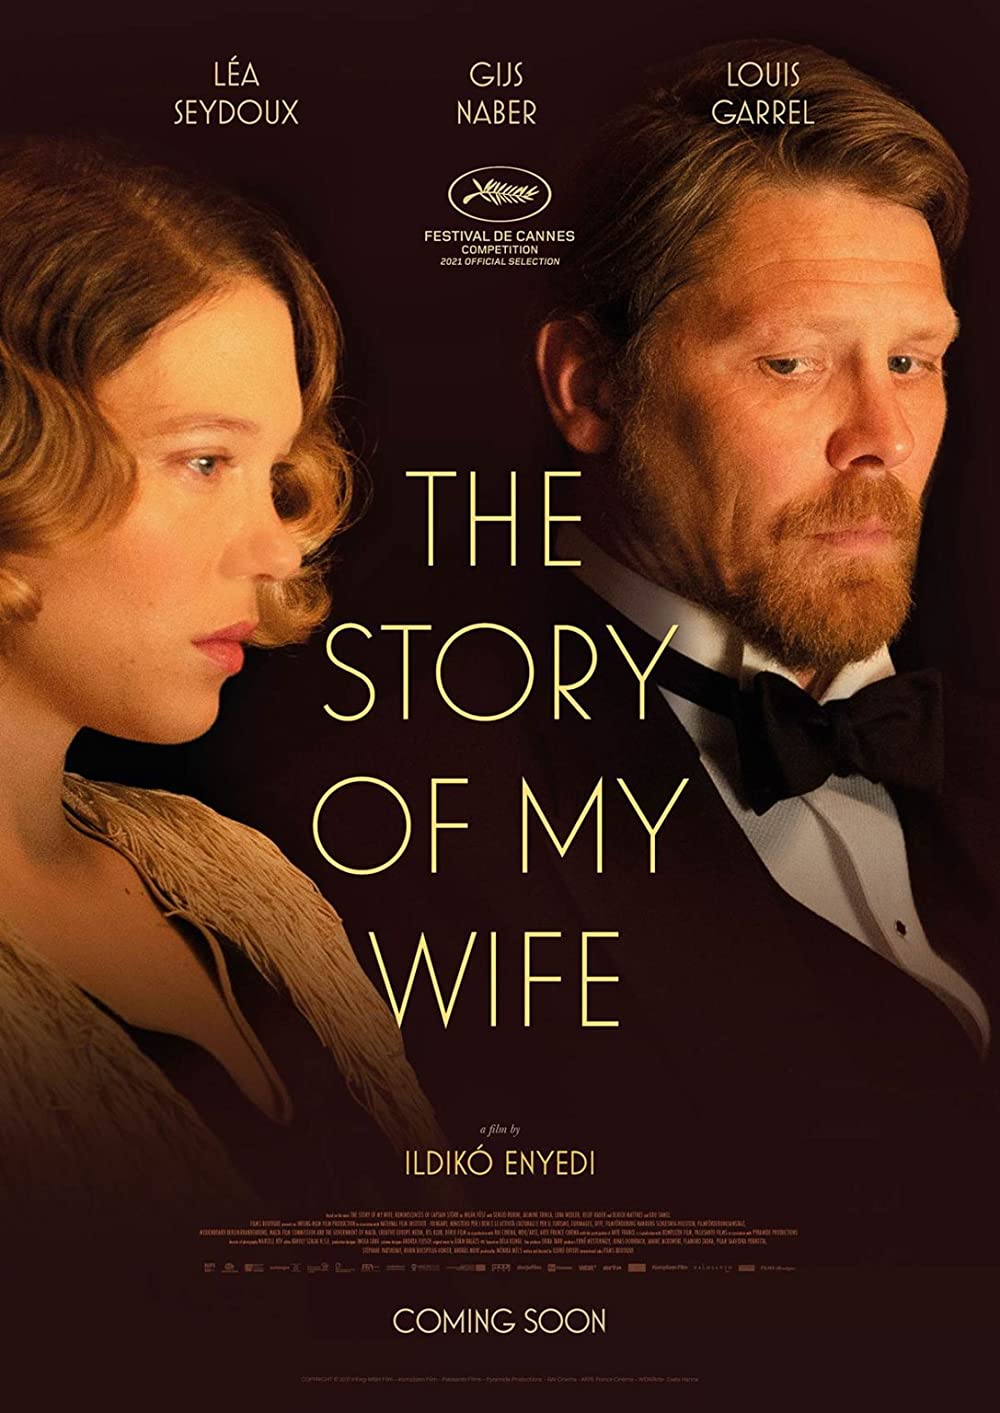 THE STORY OF MY WIFE (2021) 1080p Bluray DTS-HD MA5.1 RETAIL NL Sub